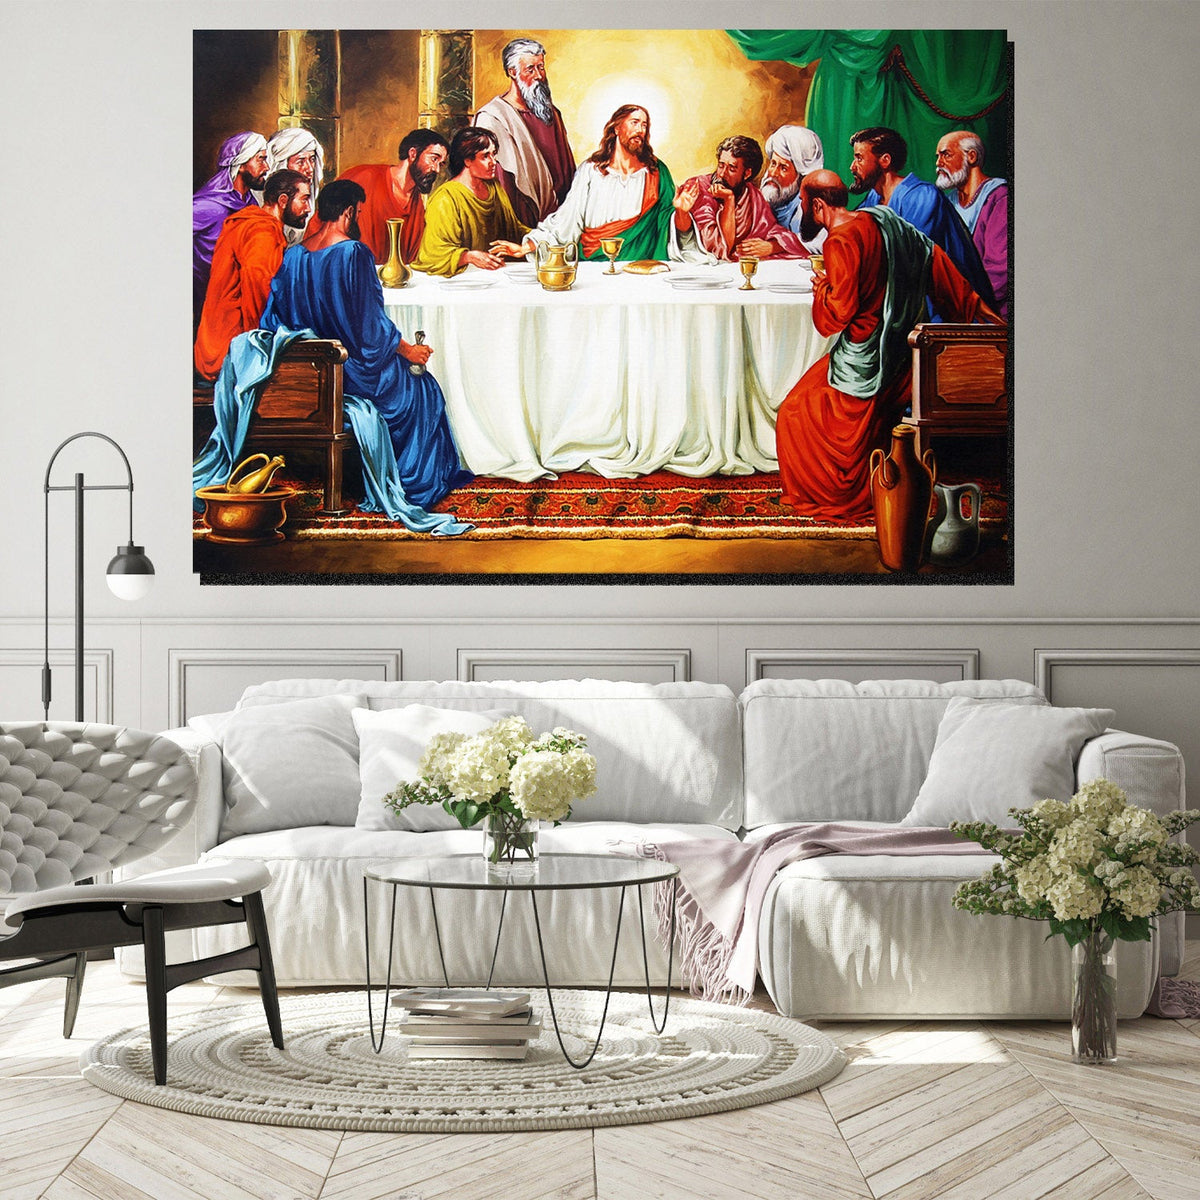 https://cdn.shopify.com/s/files/1/0387/9986/8044/products/TheLastSupperCanvasArtprintStretched-3.jpg